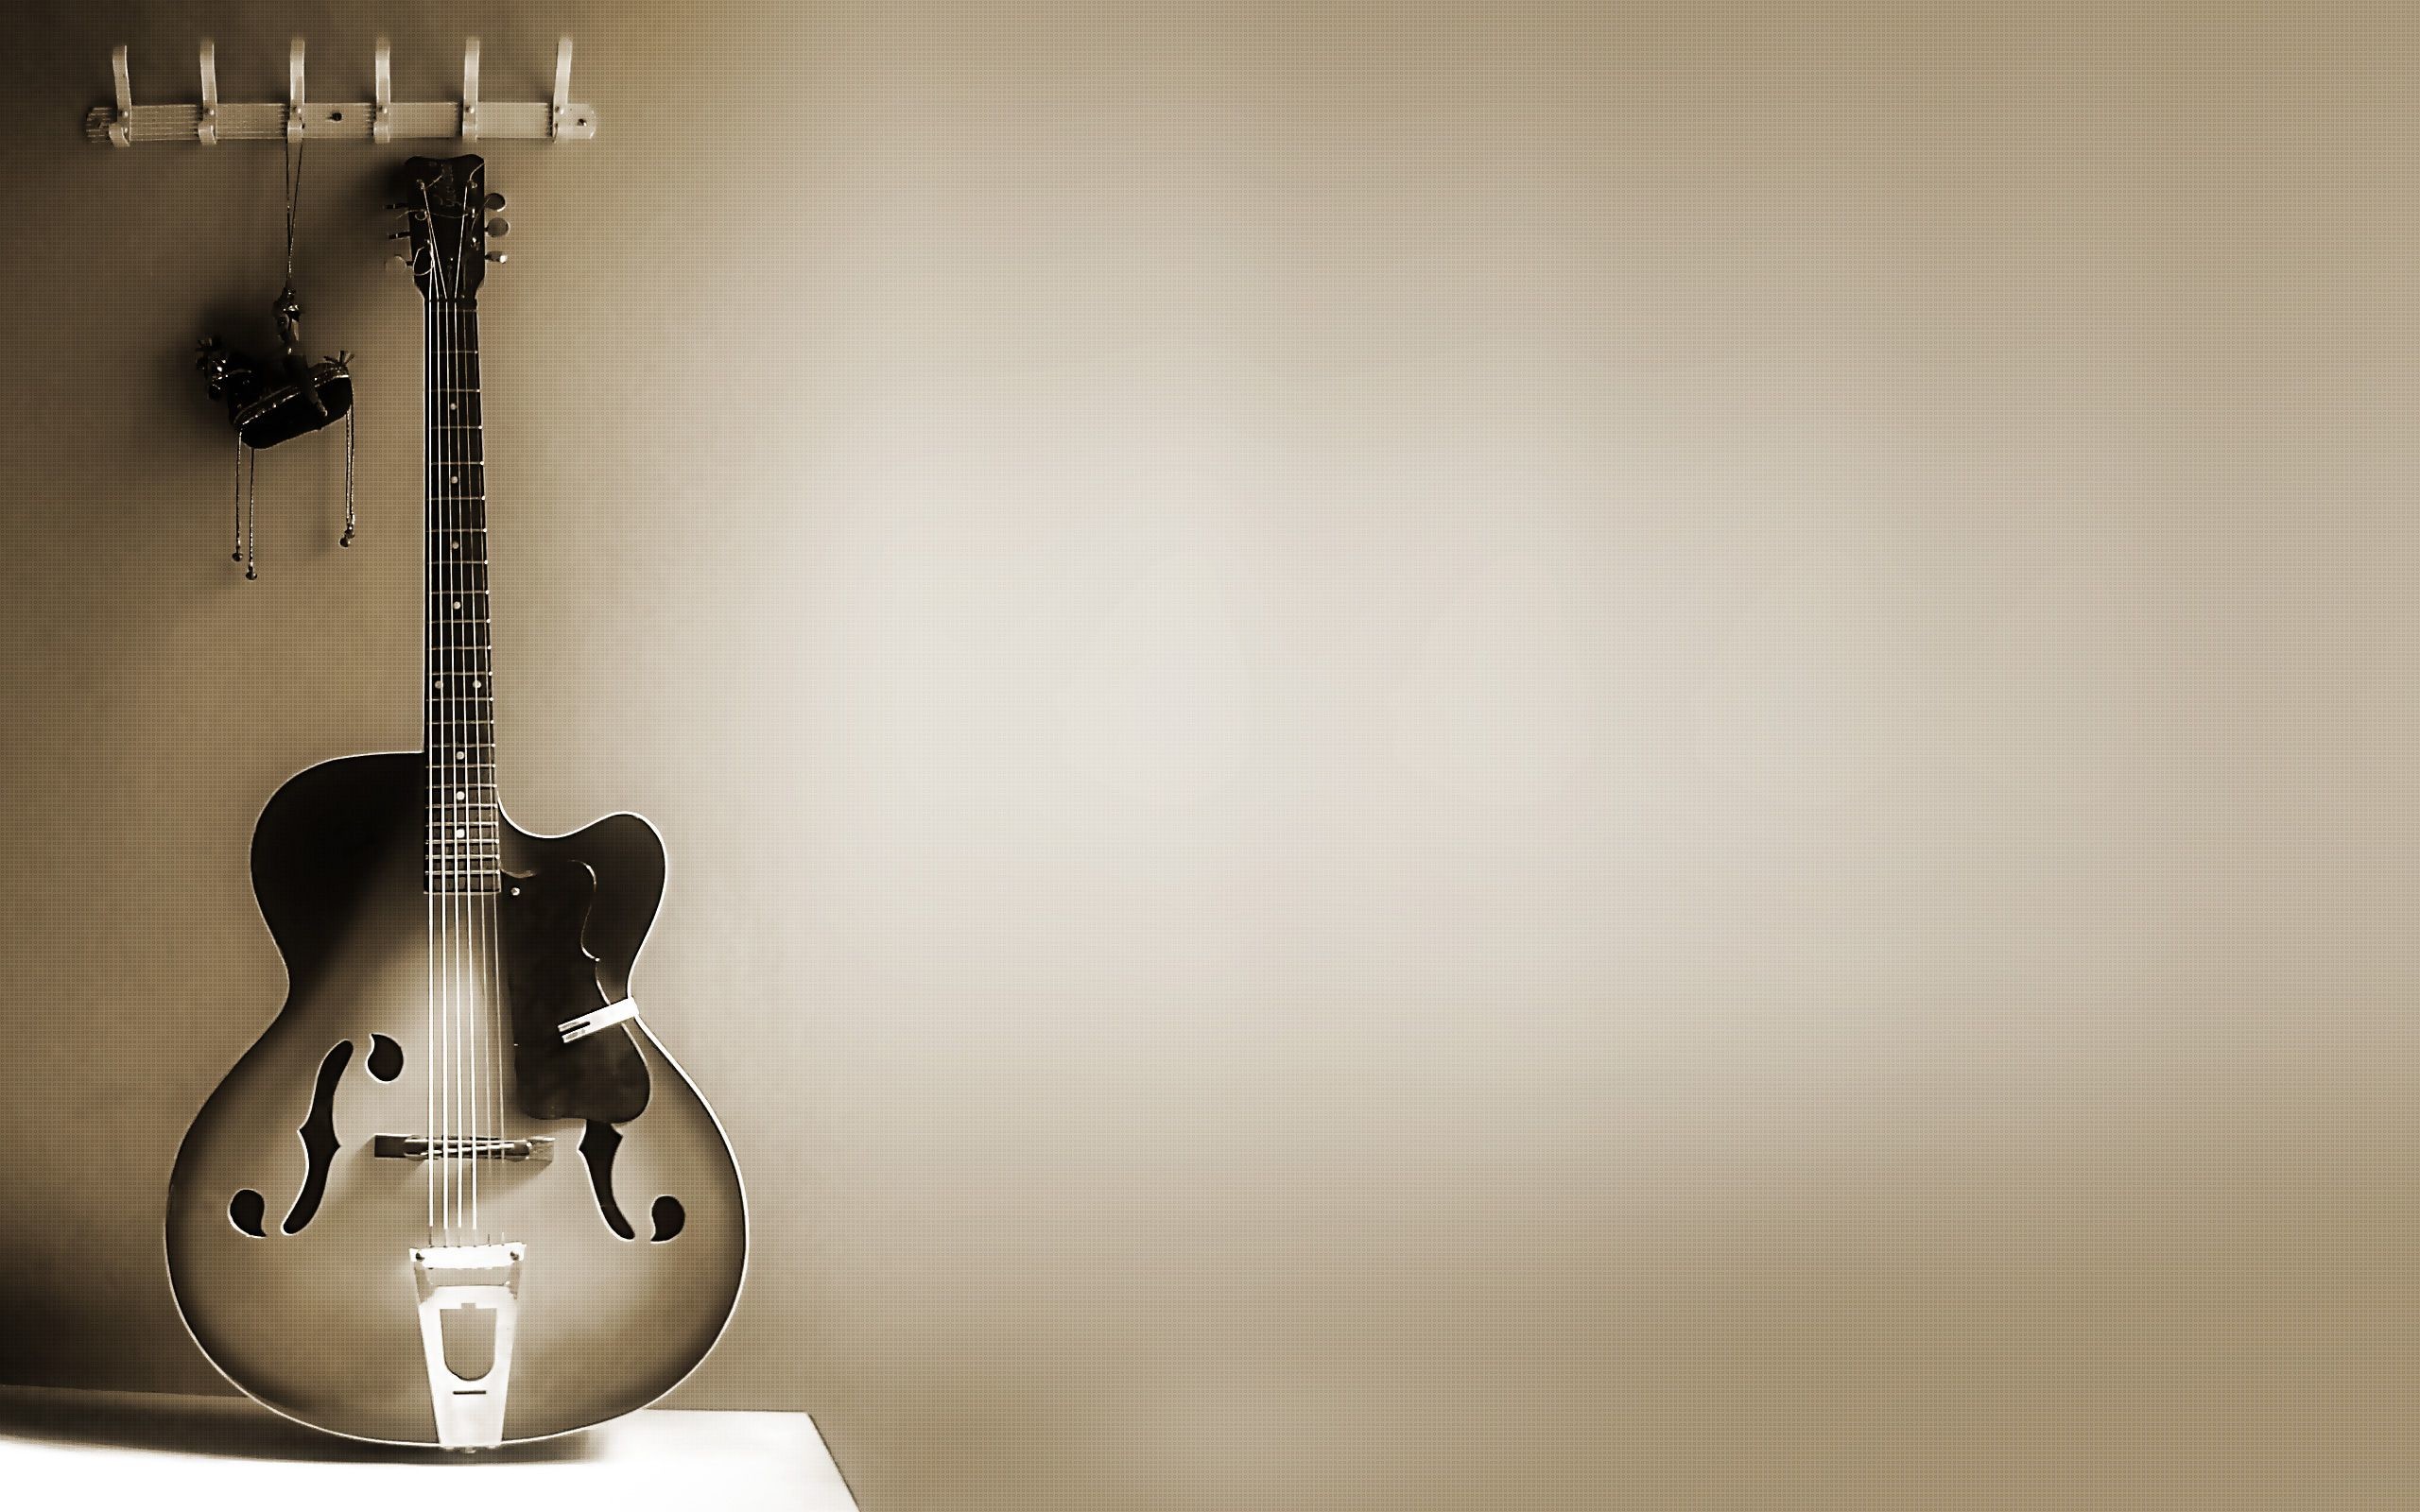 2560x1600 Guitar Wallpapers Images